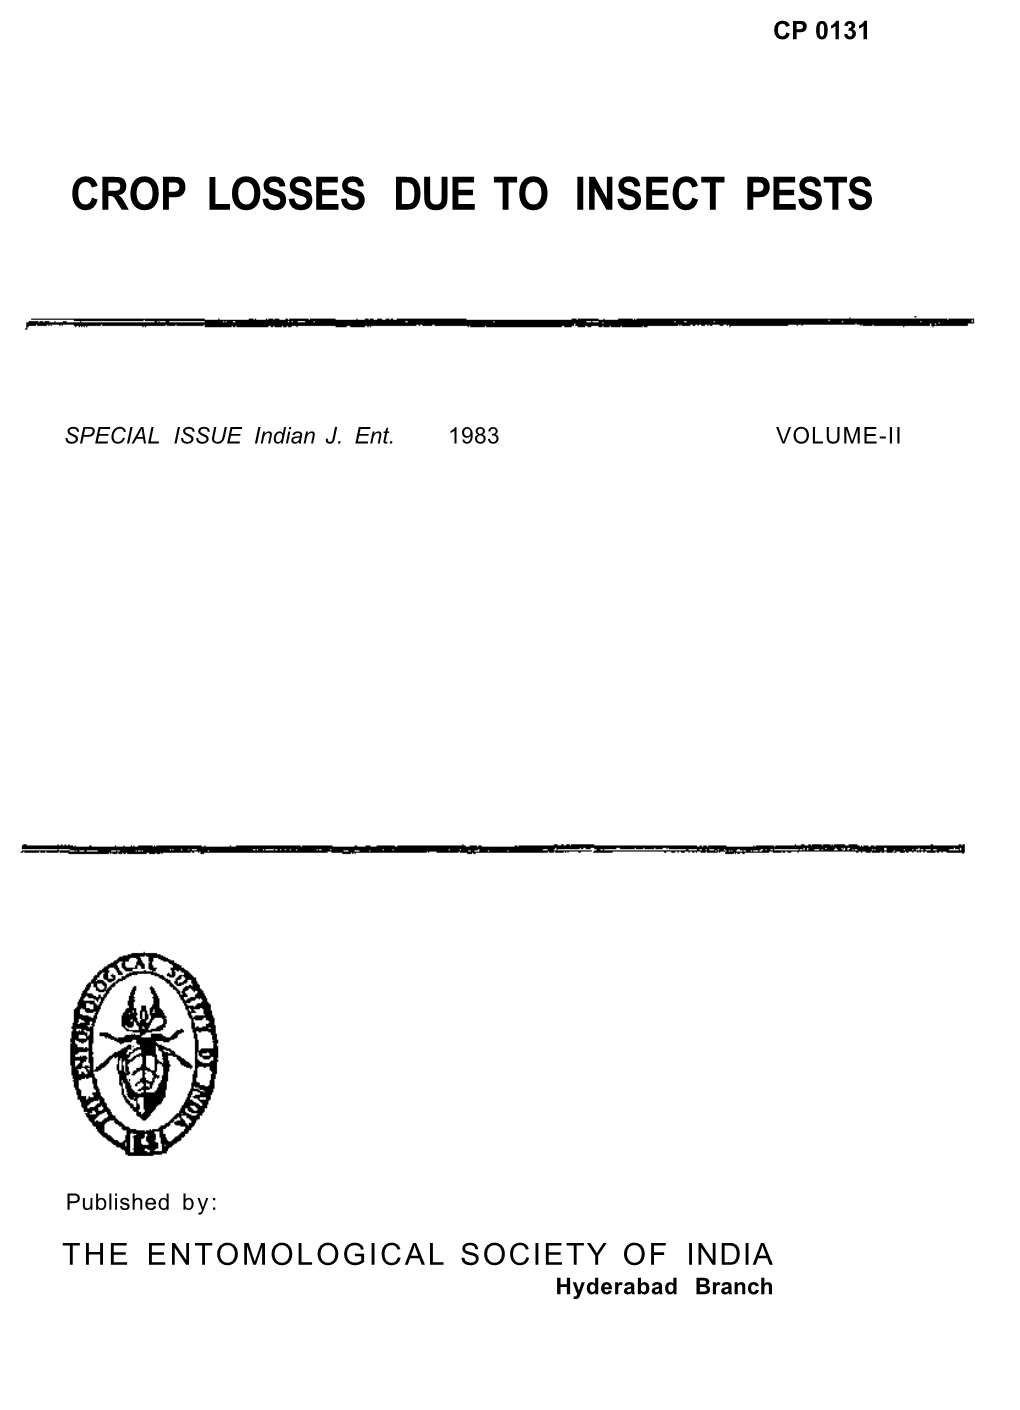 Crop Losses Due to Insect Pests